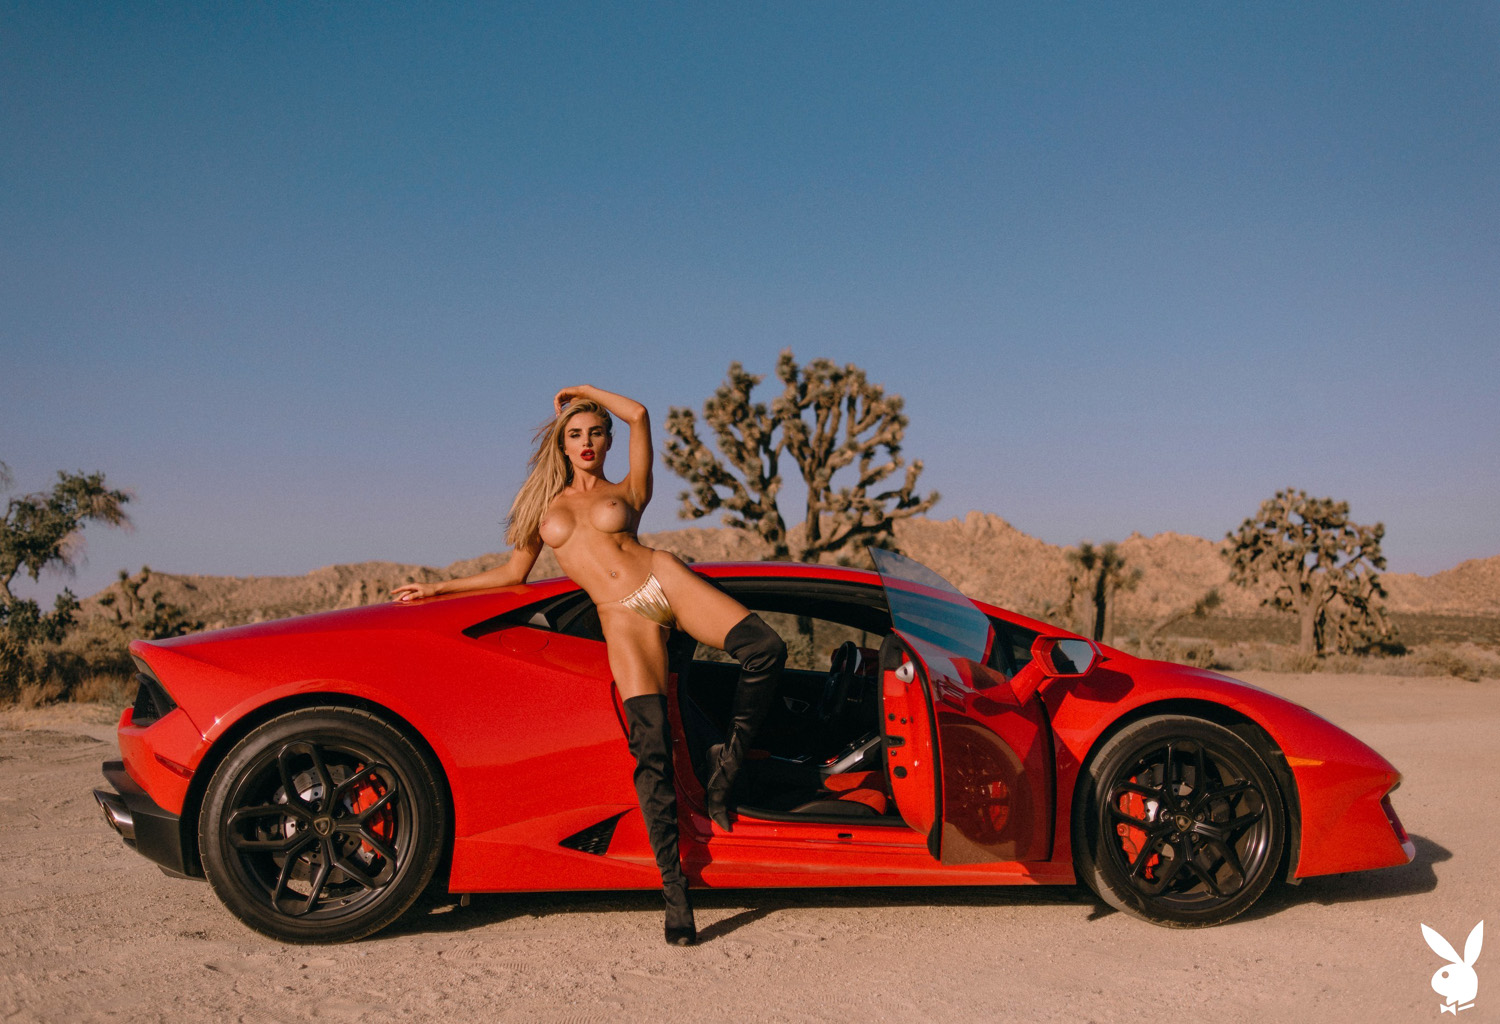 Kenzie Anne strips nude on top of an iconic red race car